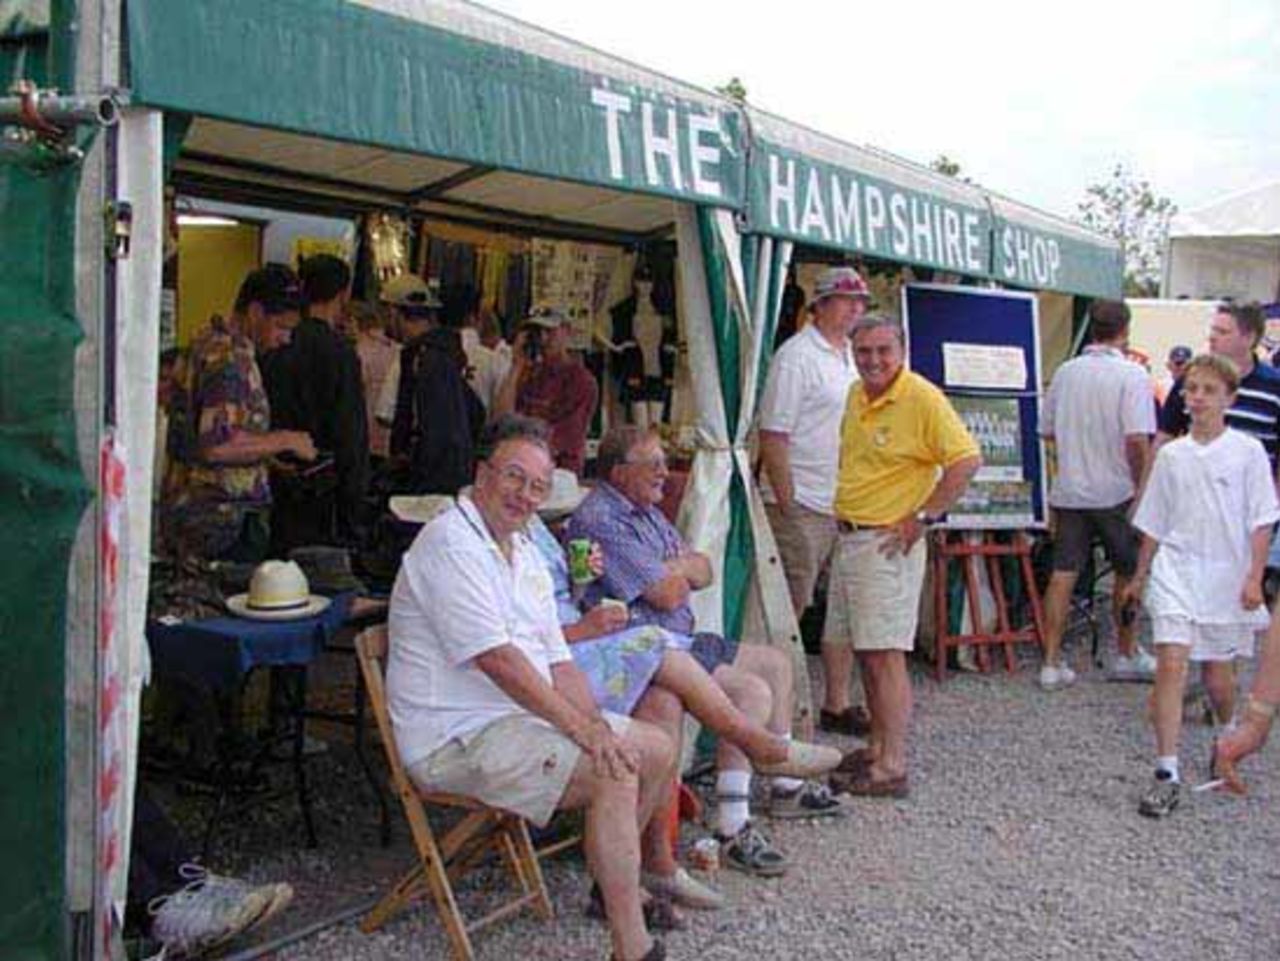 The Hampshire shop does a roaring trade at the Day/Night match.